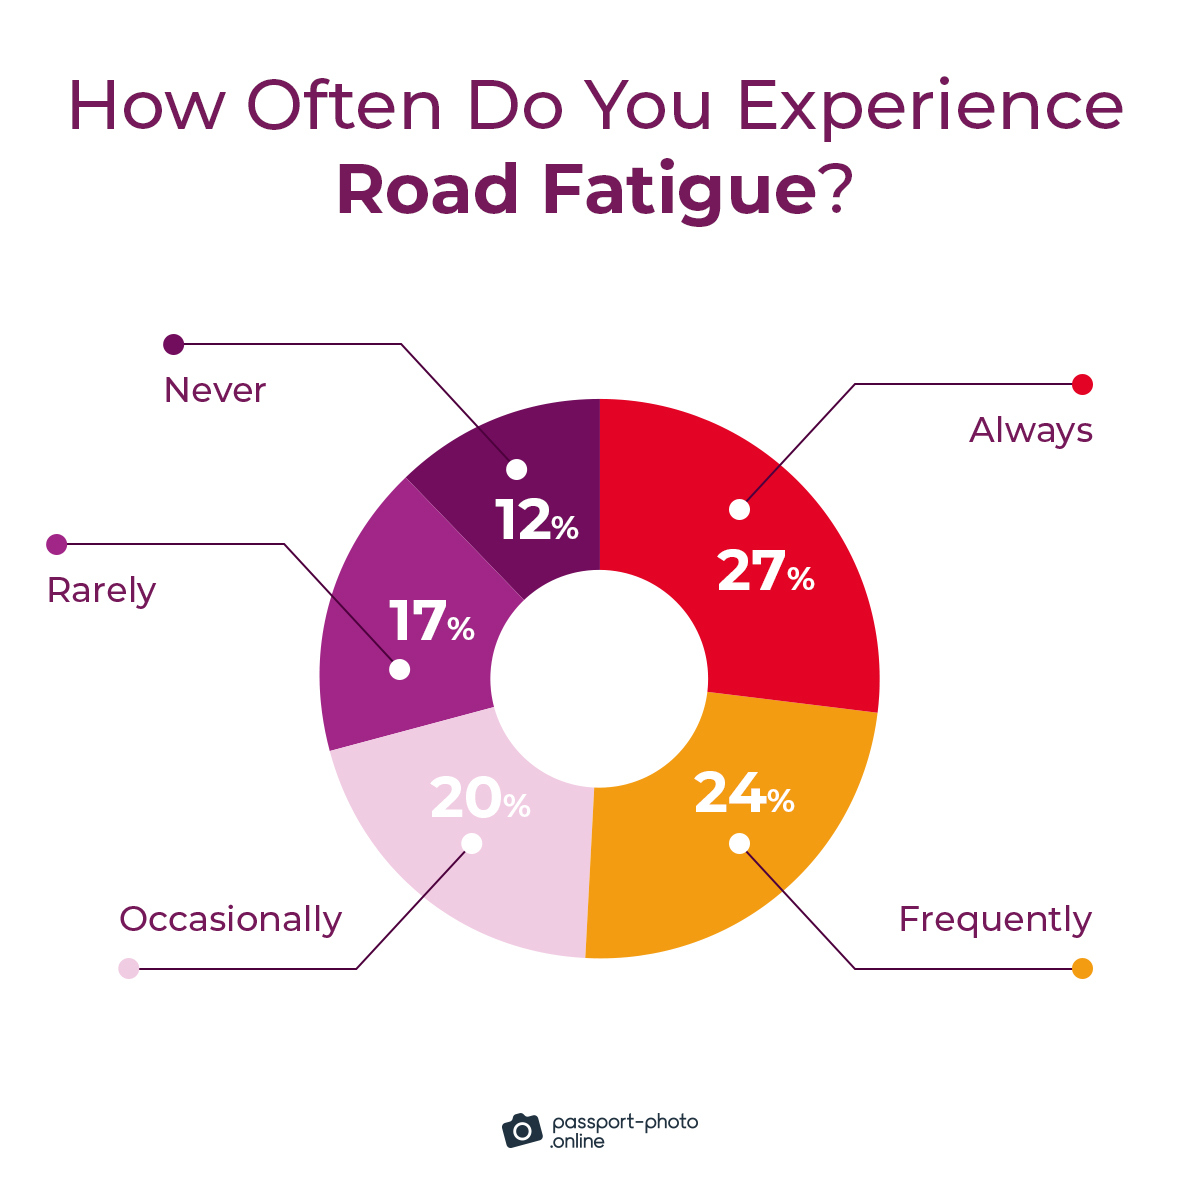 51% of digital nomads experience road fatigue frequently or always.